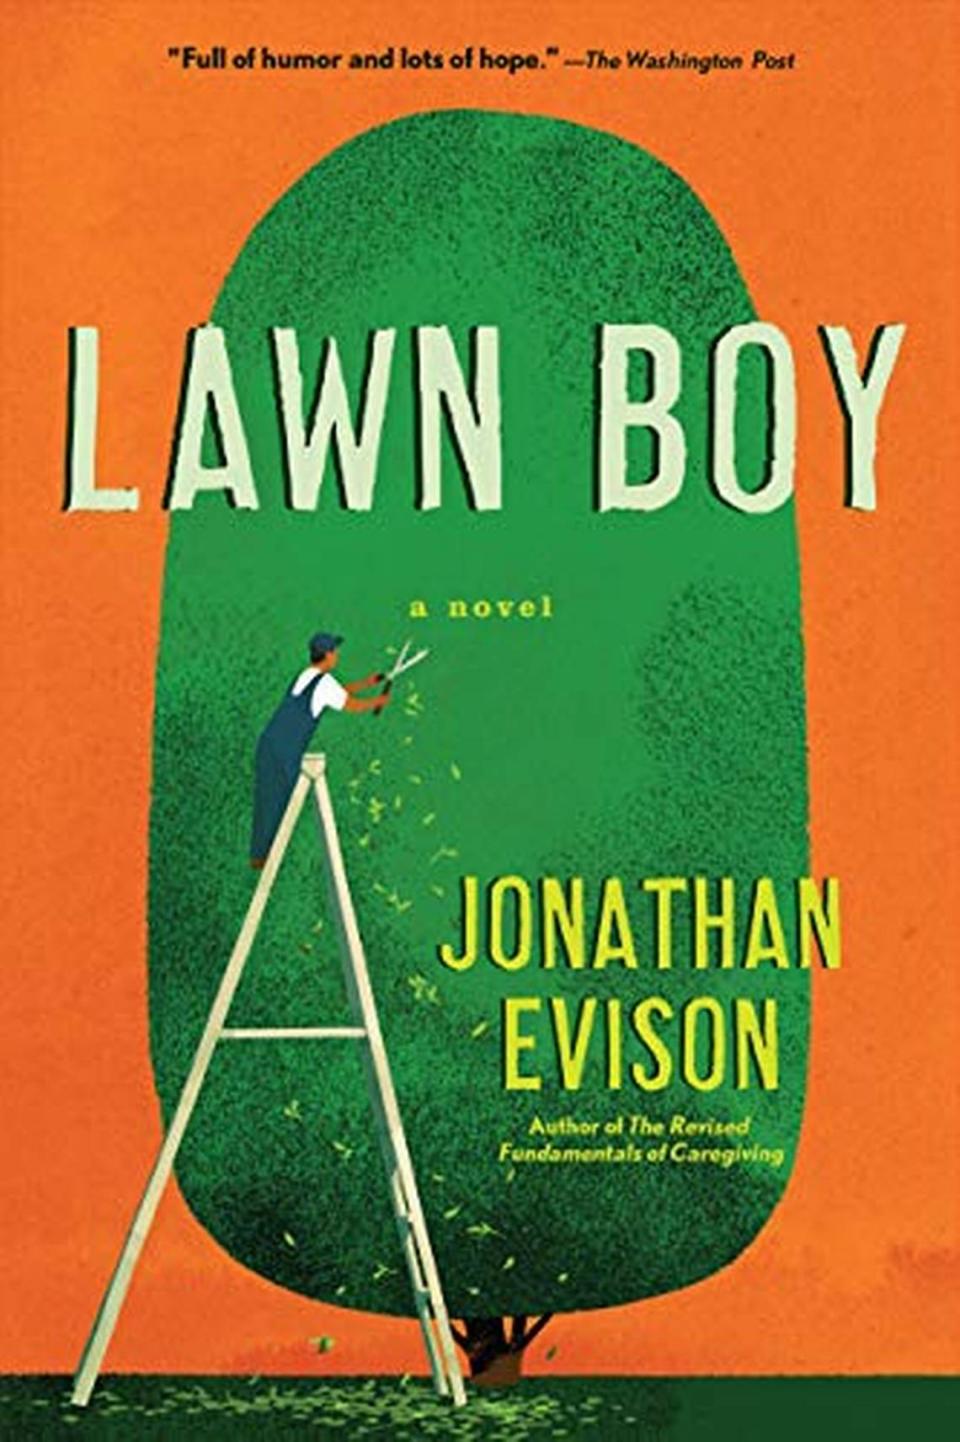 The book “Lawn Boy” by Jonathan Evison.